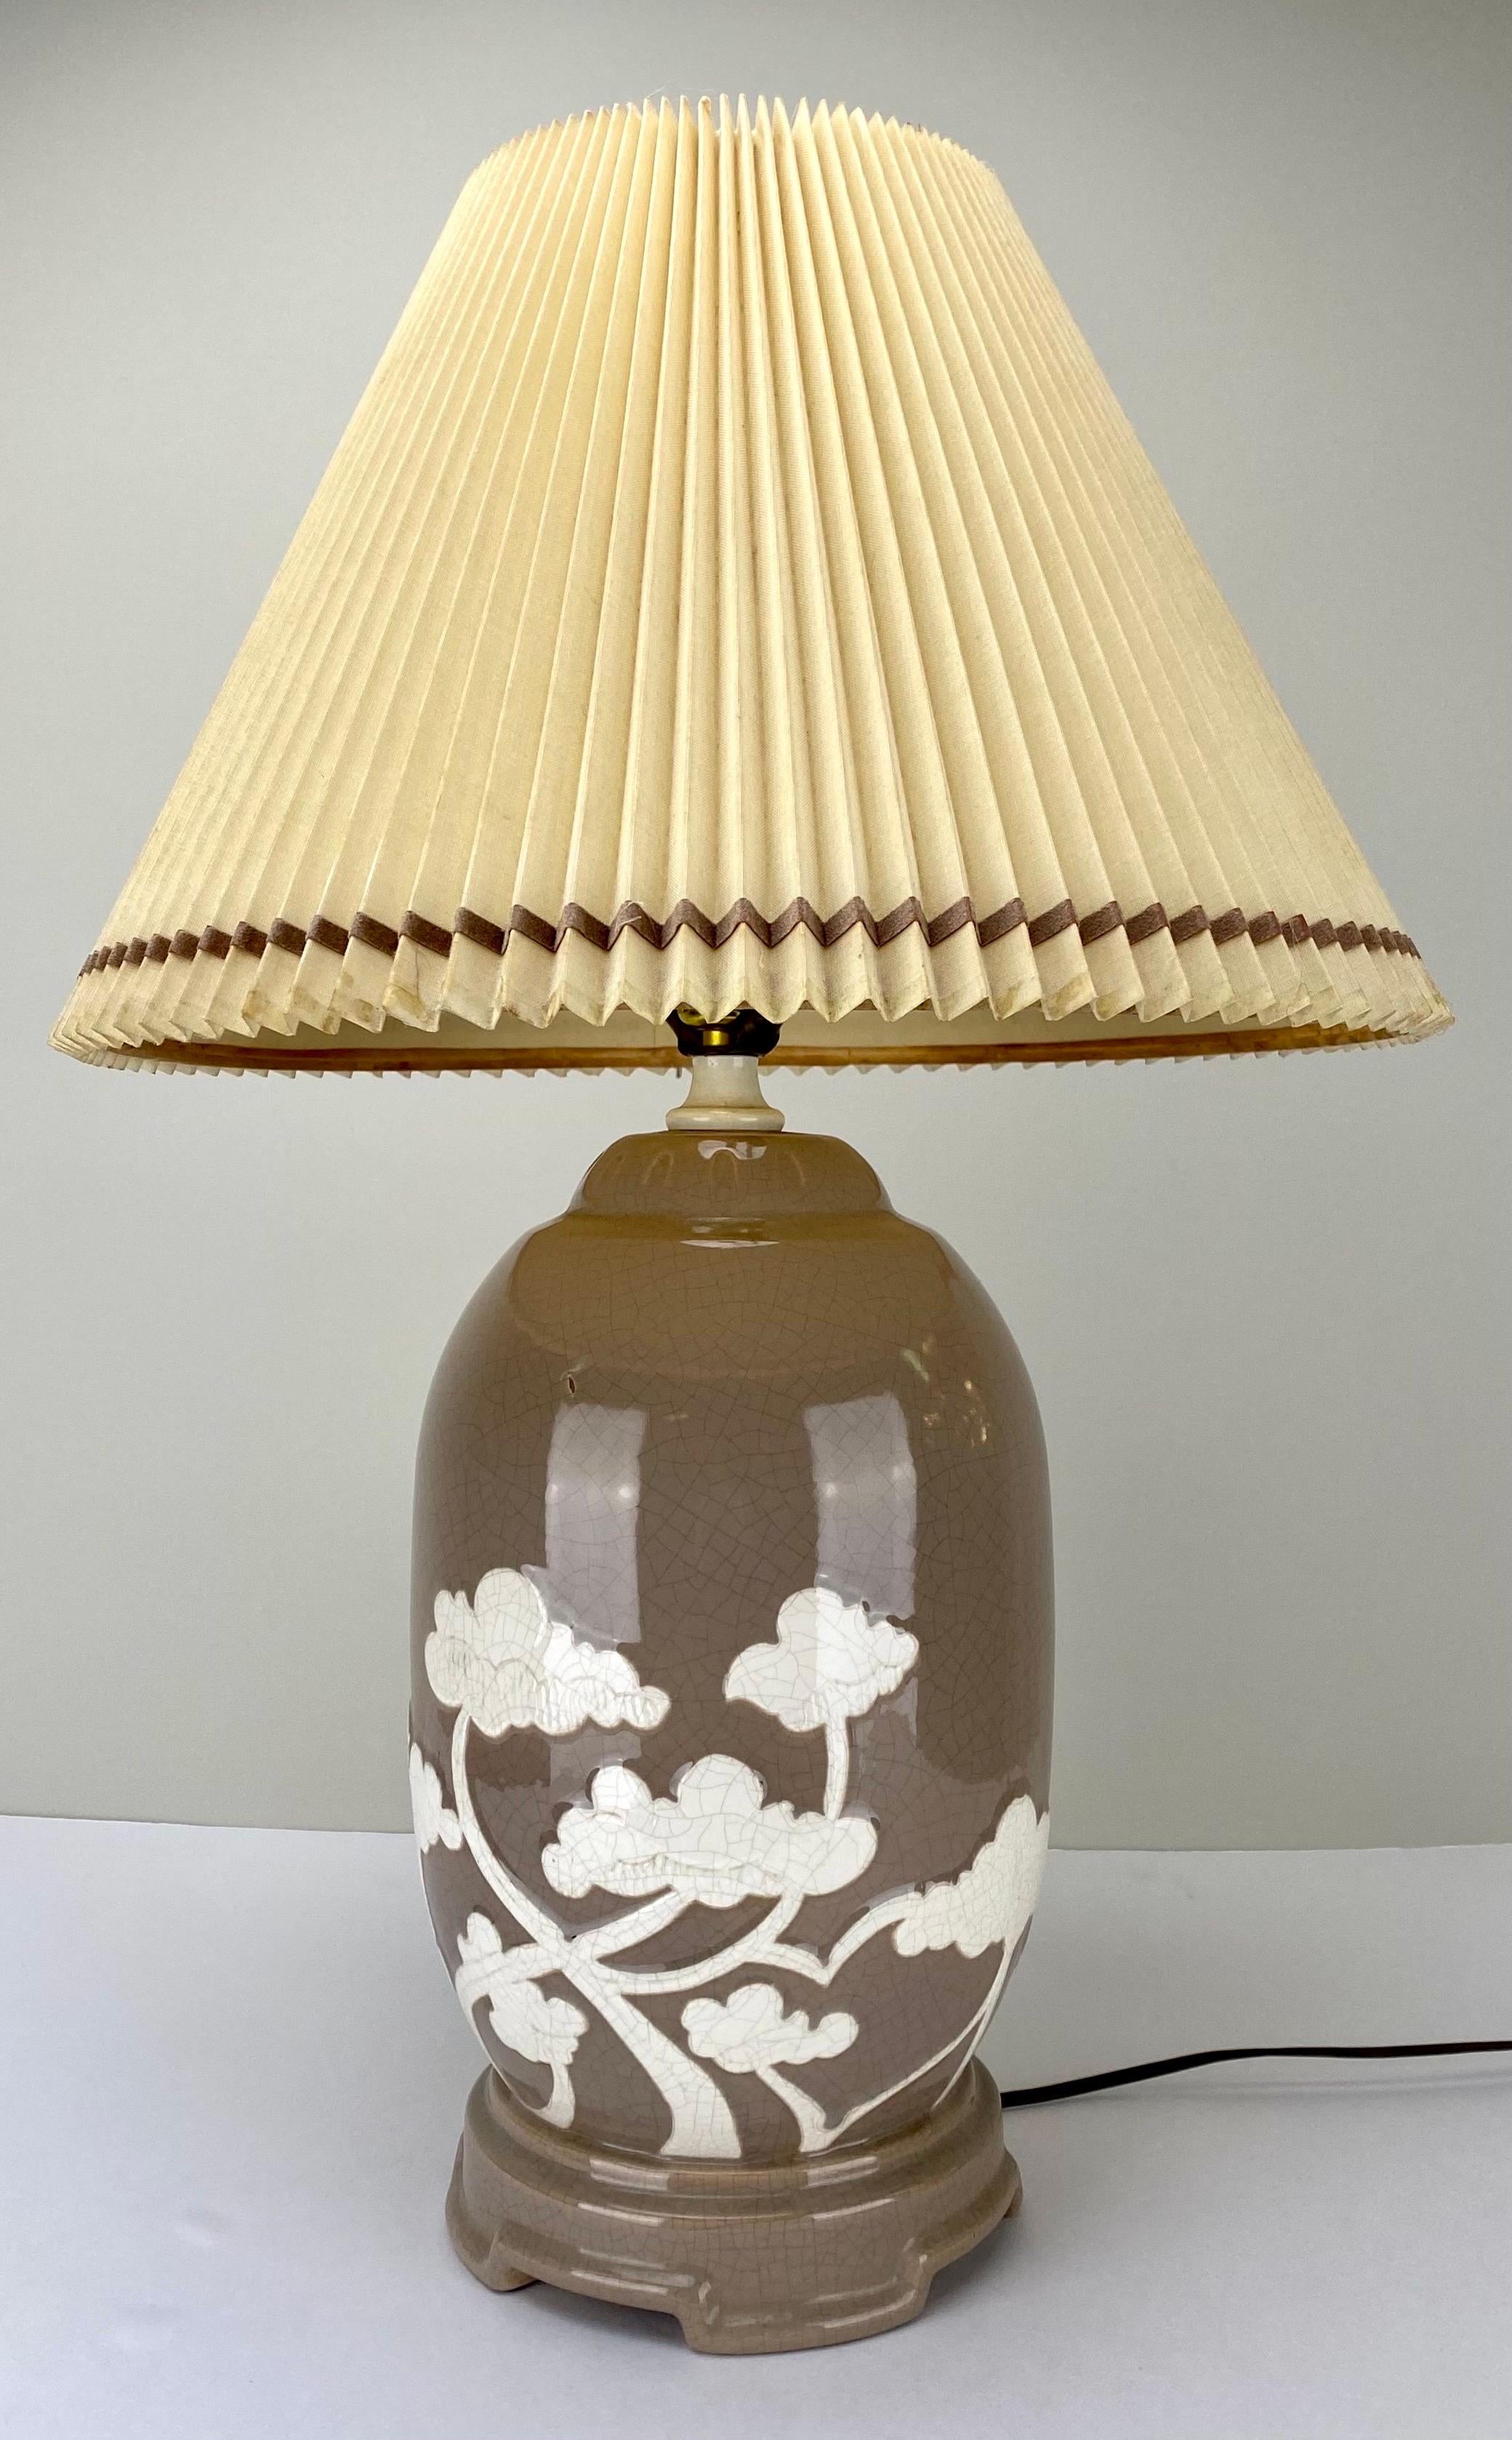 A pair of Asian Mid-century round ceramic table lamps, each exuding a timeless elegance through their stylish taupe color. The lamp bodies are adorned with a delicate white relief design, depicting the graceful silhouette of bonsai trees, adding an